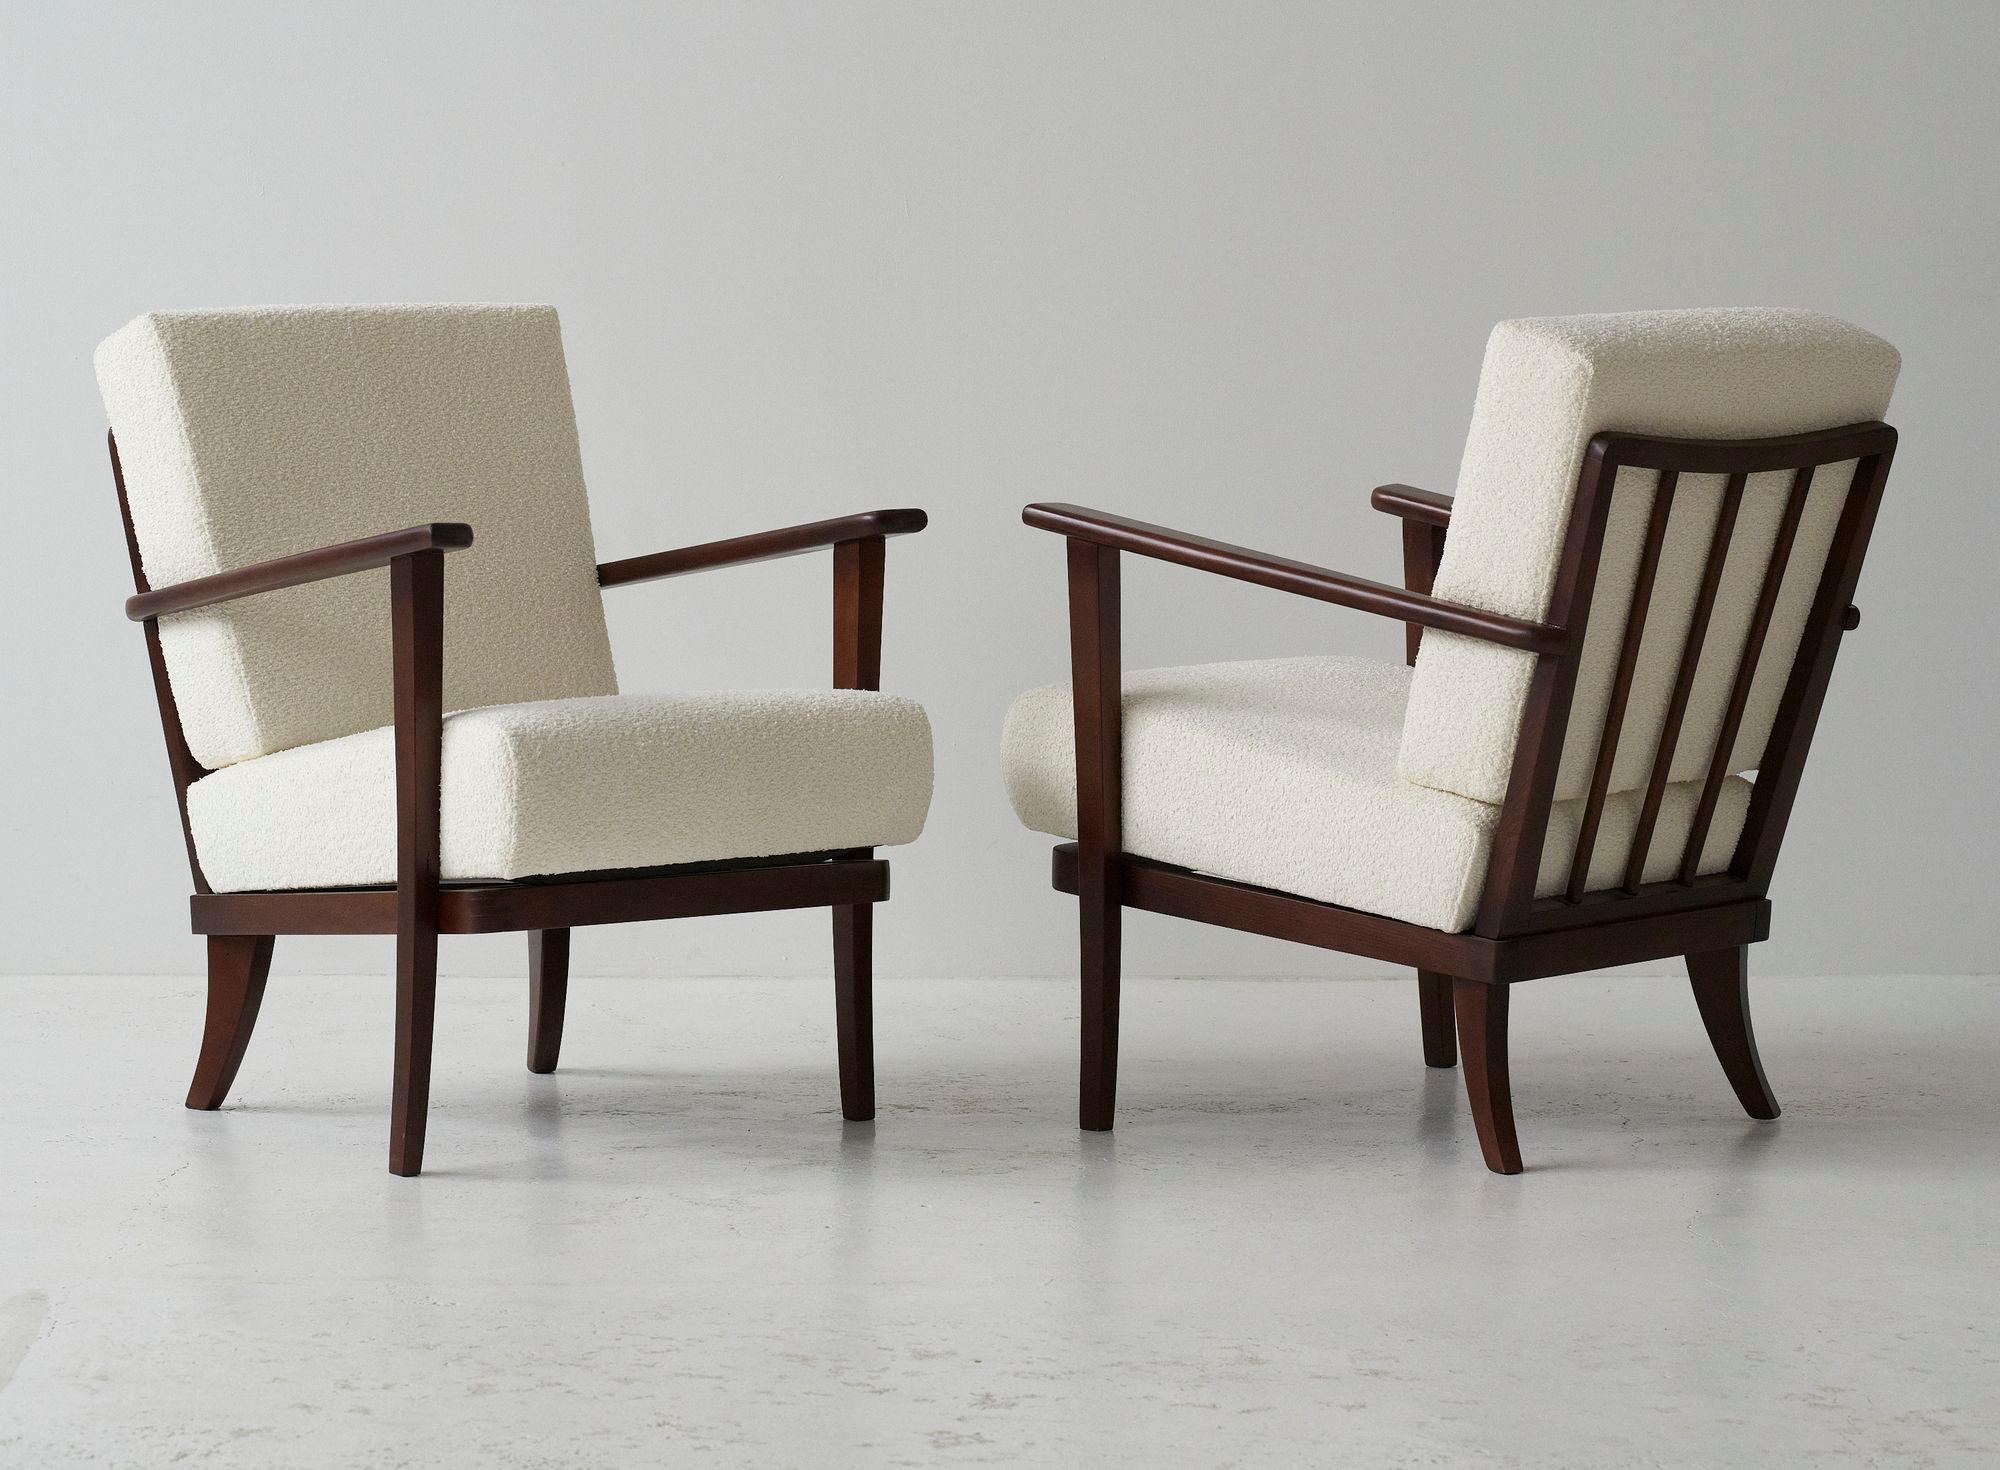 Set of 2 armchairs produced for TON during the 1960's in former Czechoslovakia., as many of TON's furniture has been. 
Wooden frame cleaned, varnished, lacquered. Seating recreated and reupholstered in a creme boucle fabric.